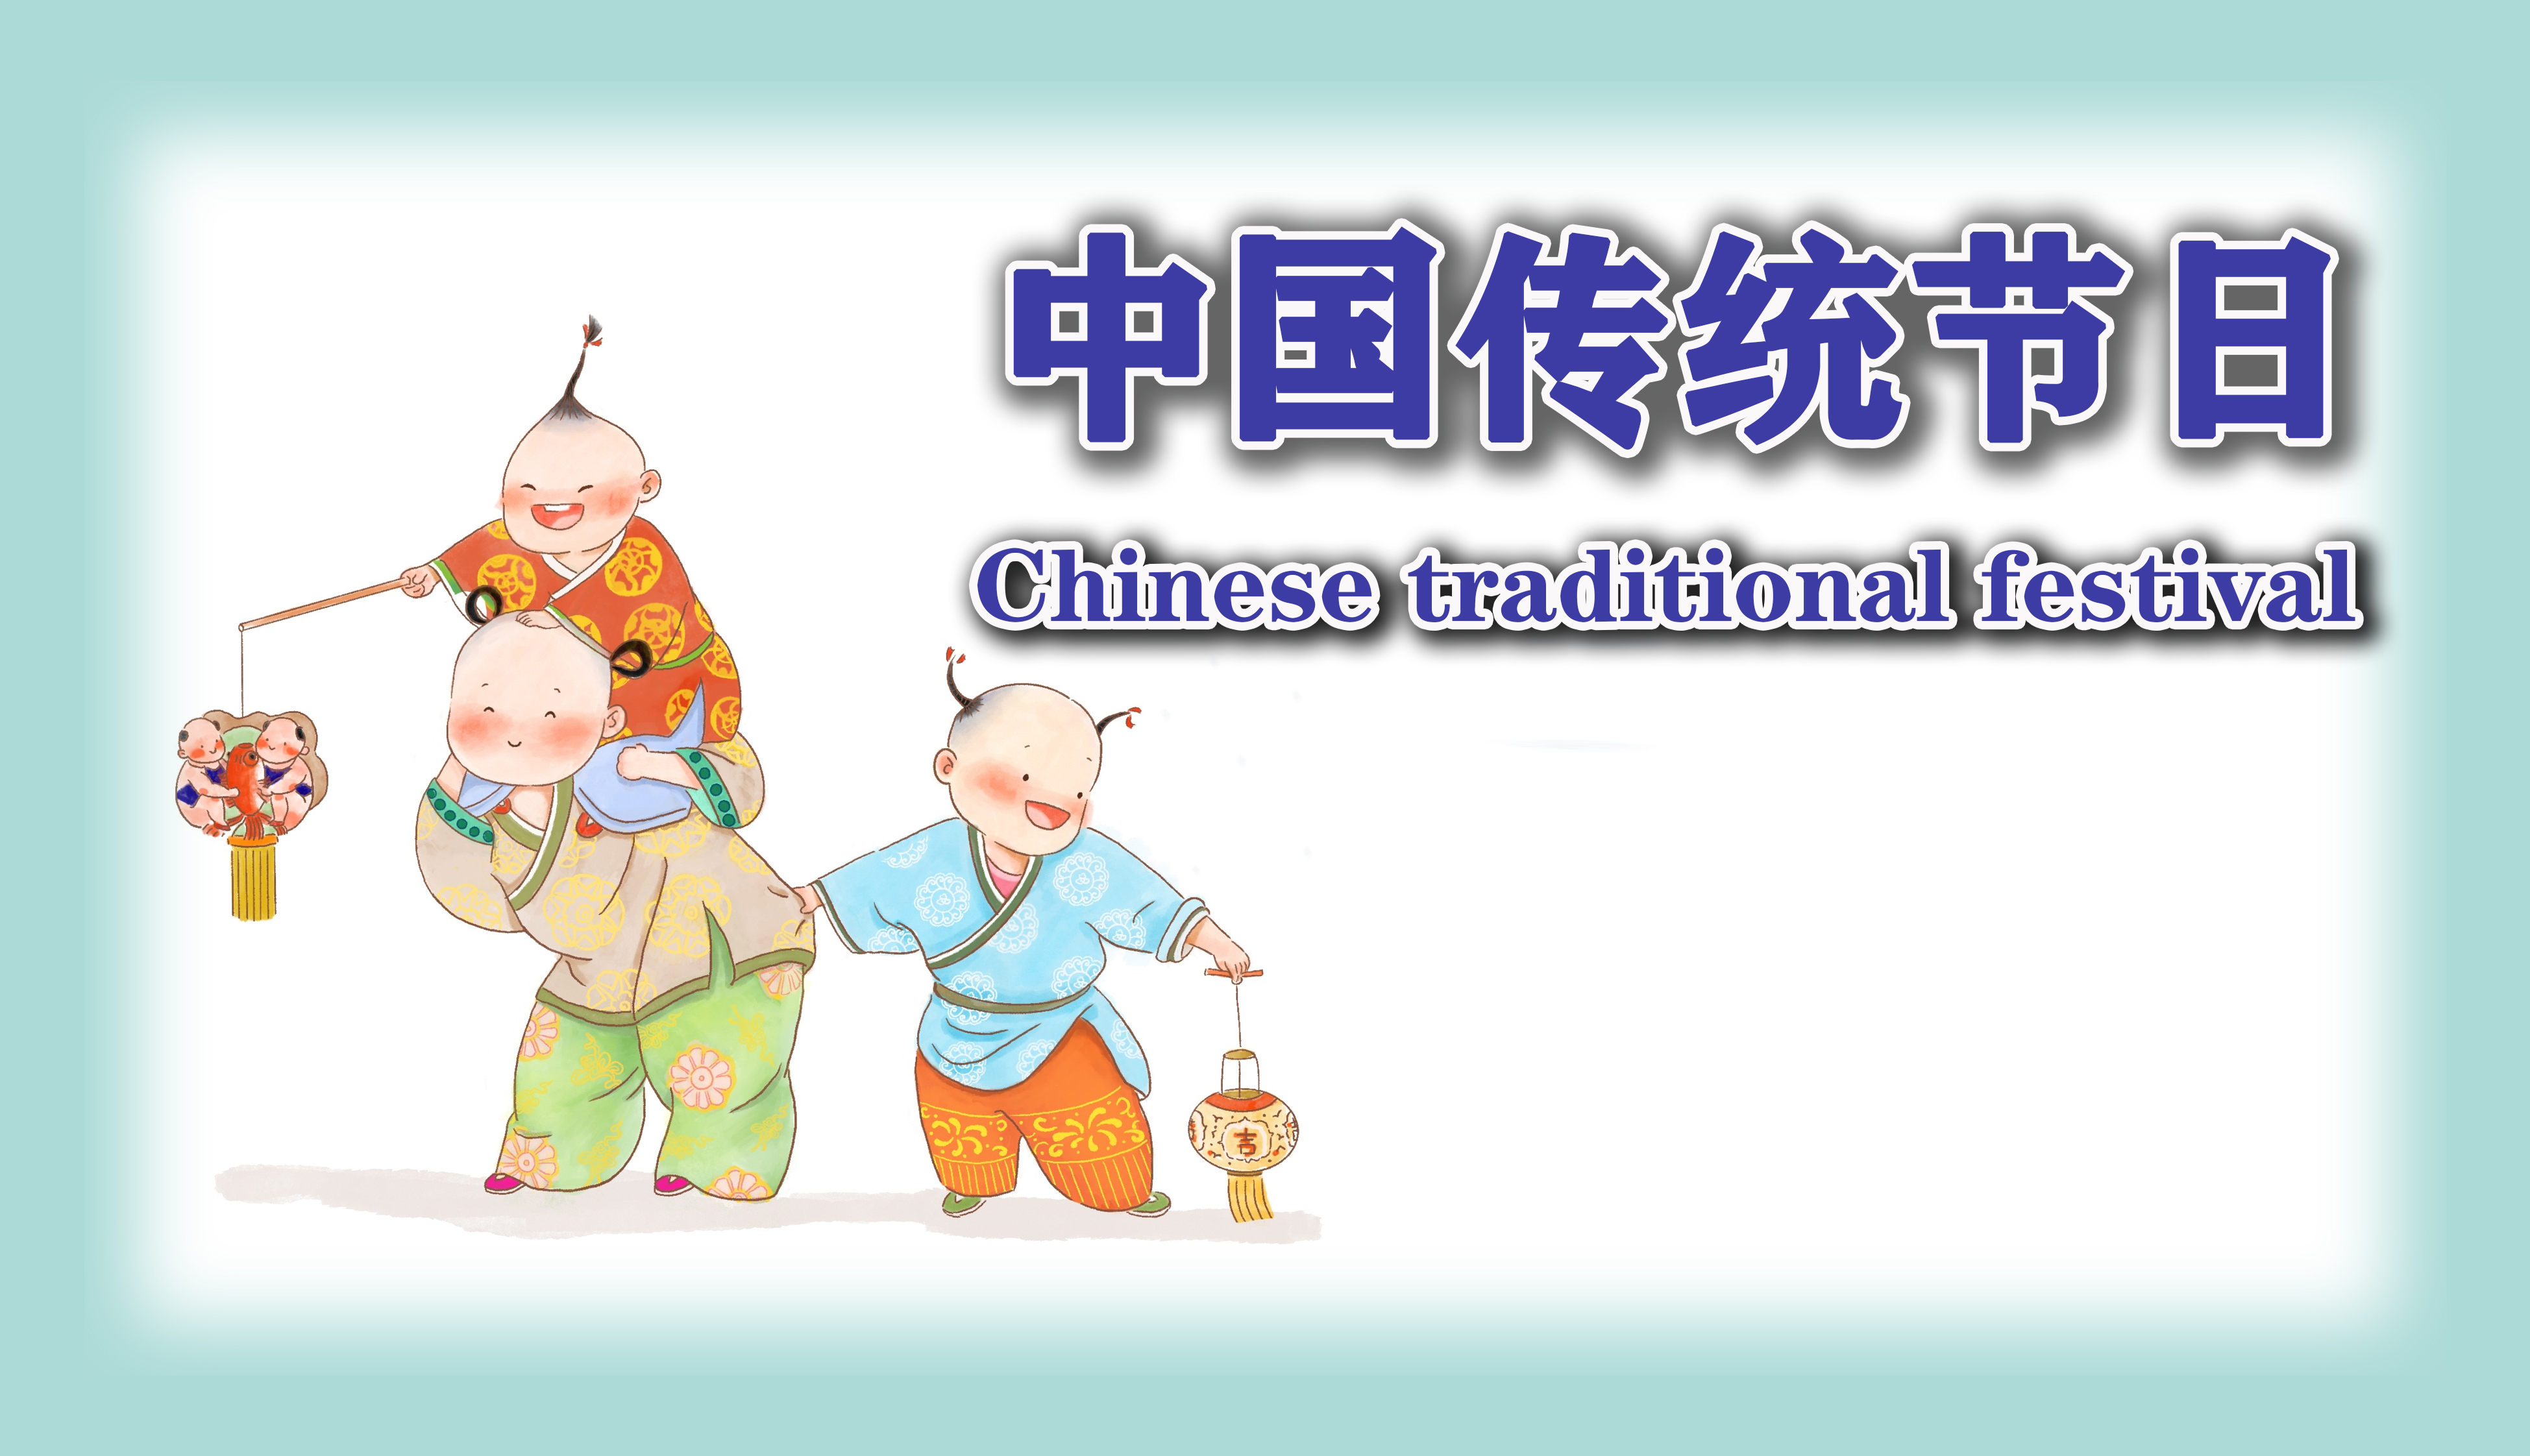 Chinese traditional festival